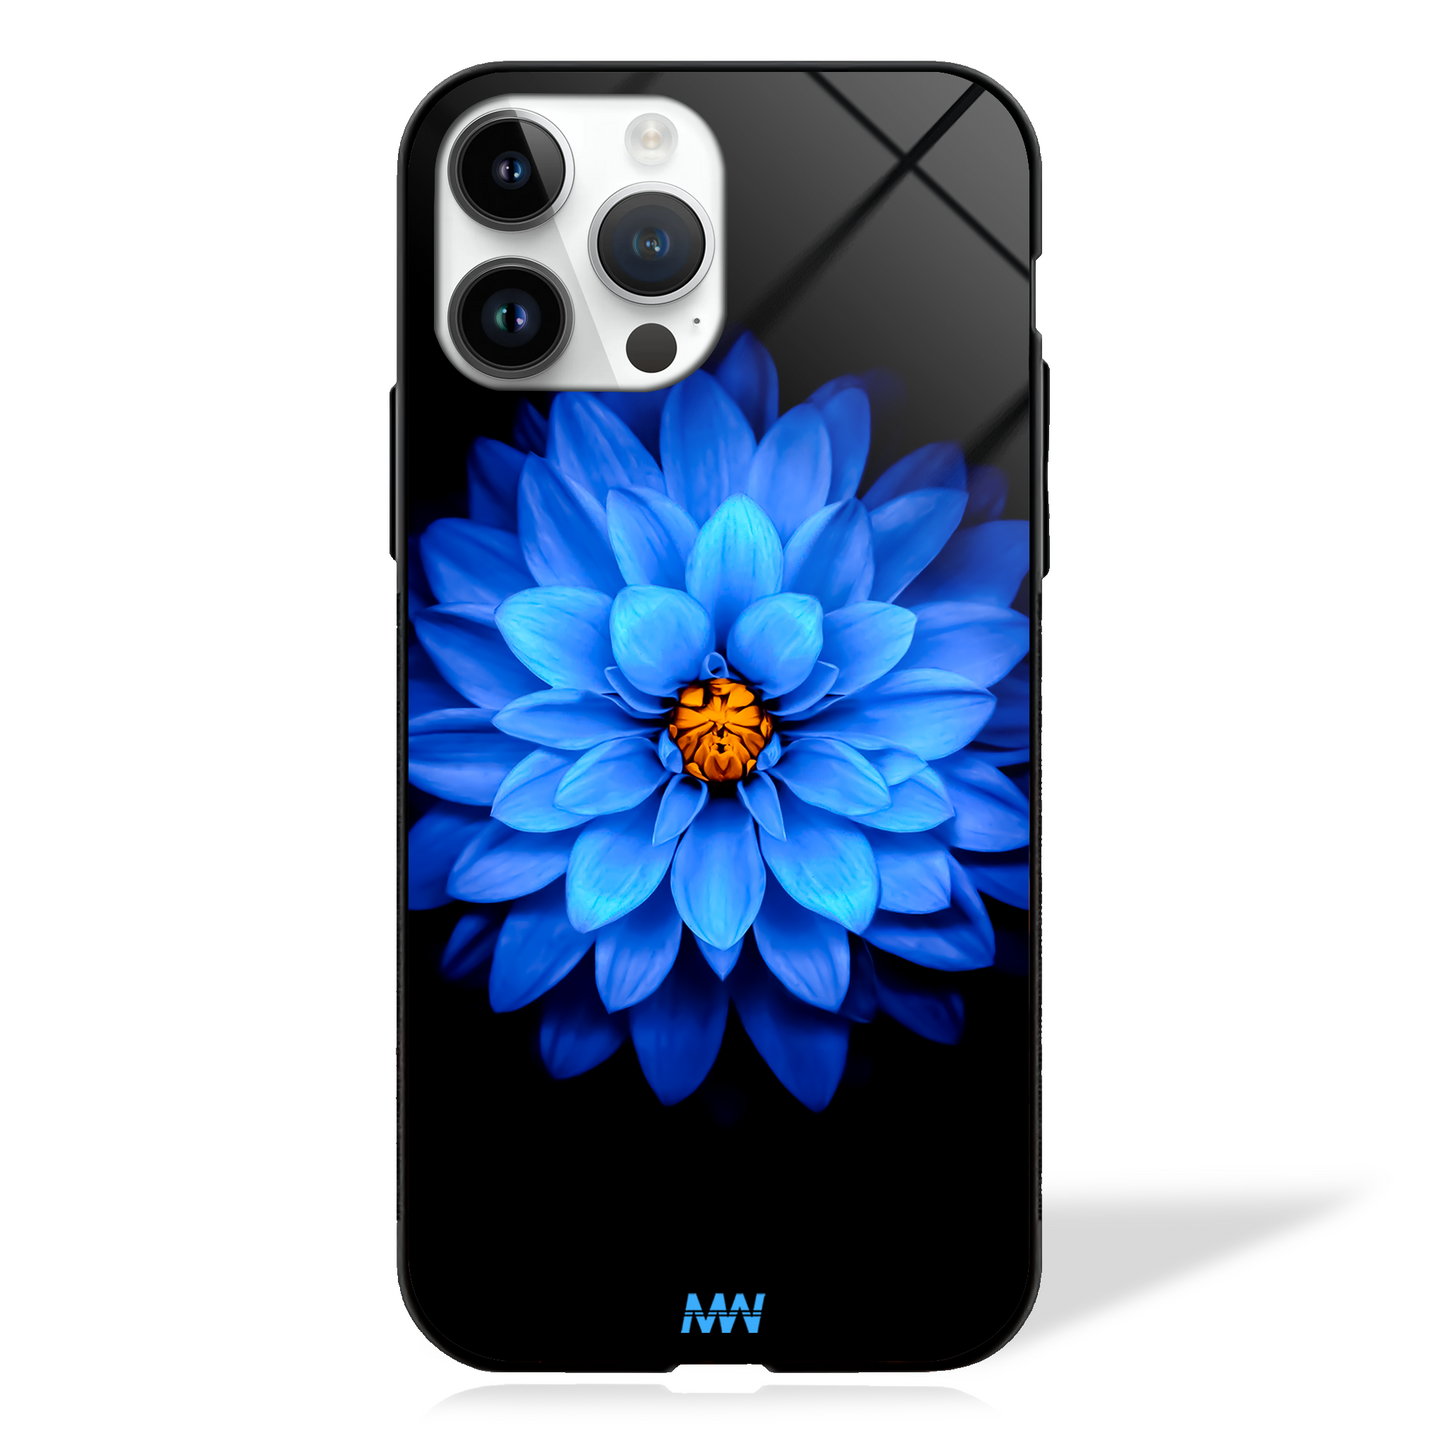 Sapphire Bloom Floral GLASS CASE